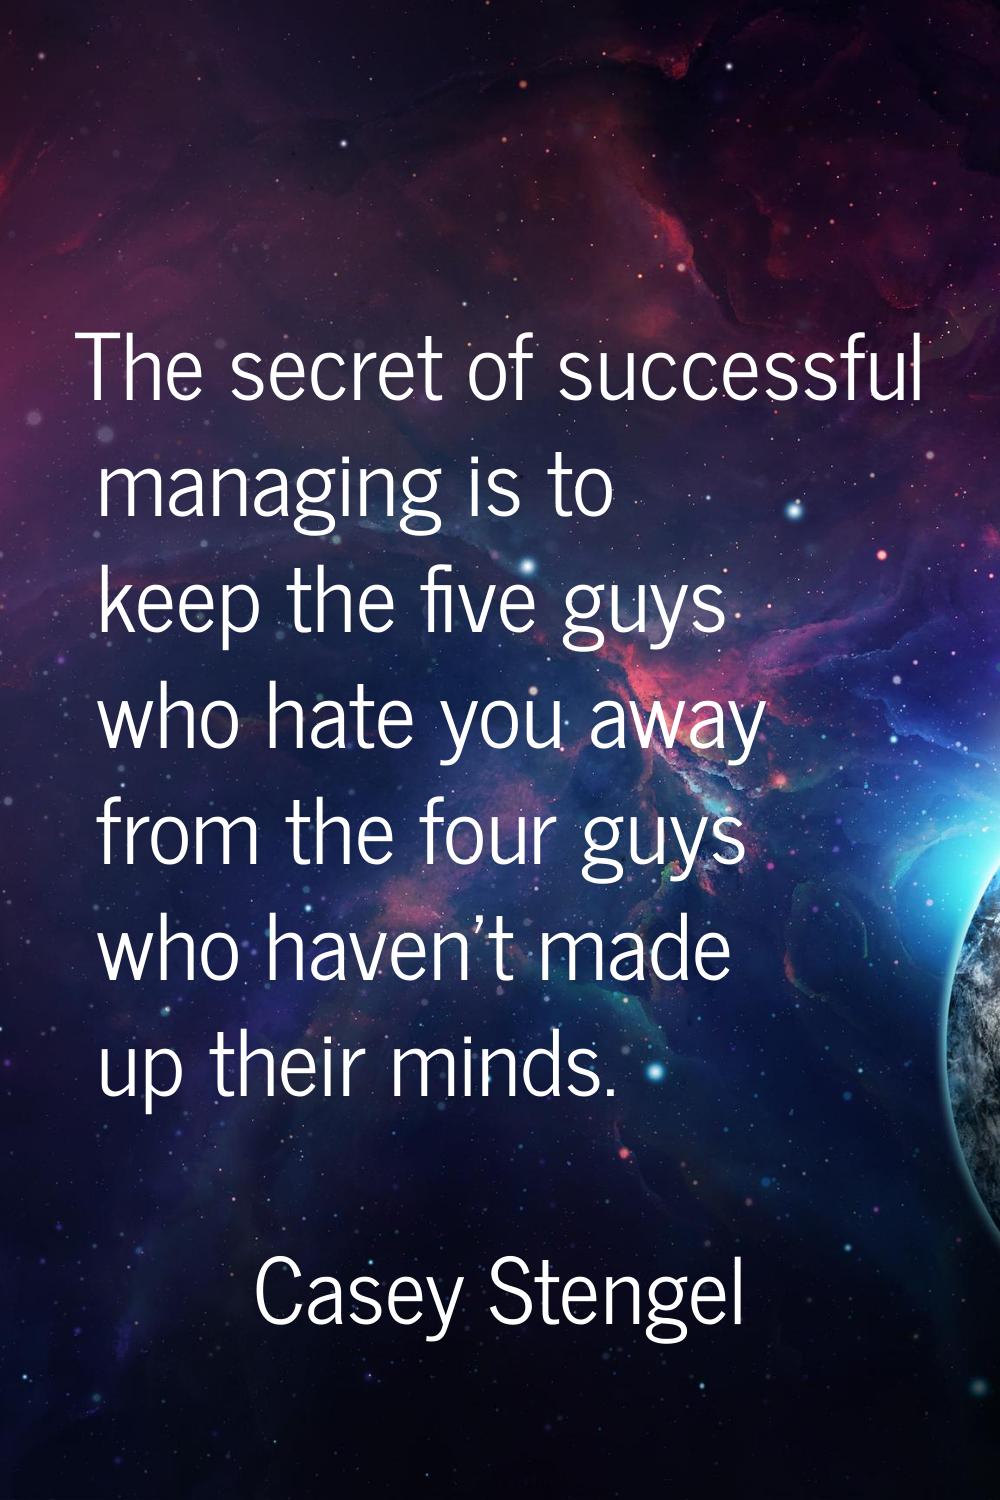 The secret of successful managing is to keep the five guys who hate you away from the four guys who